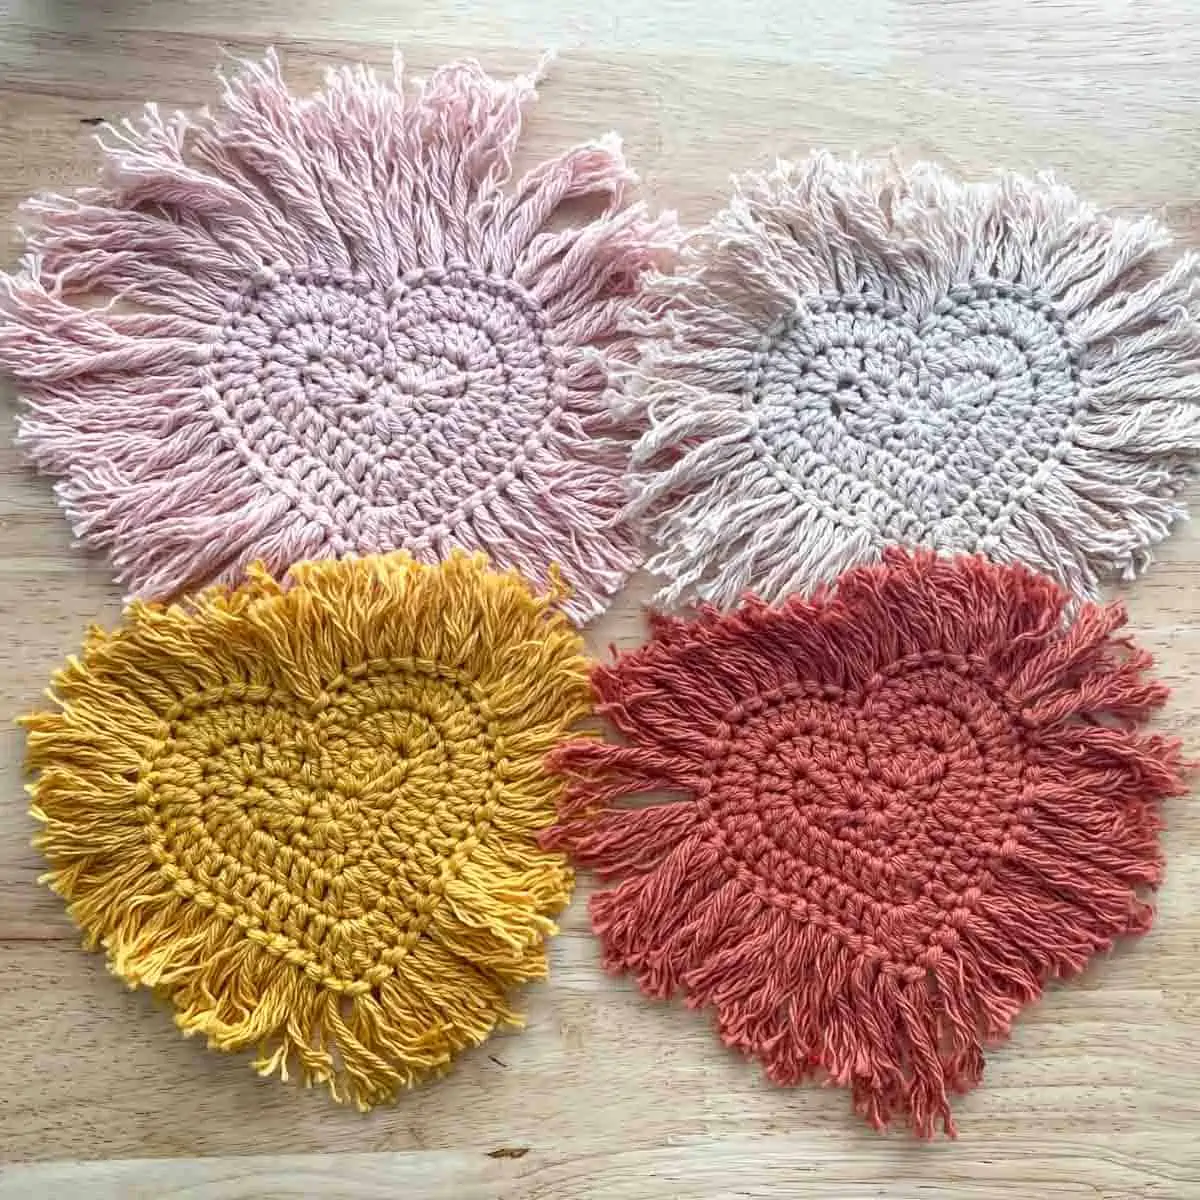 crochet hearts with crazy fringe